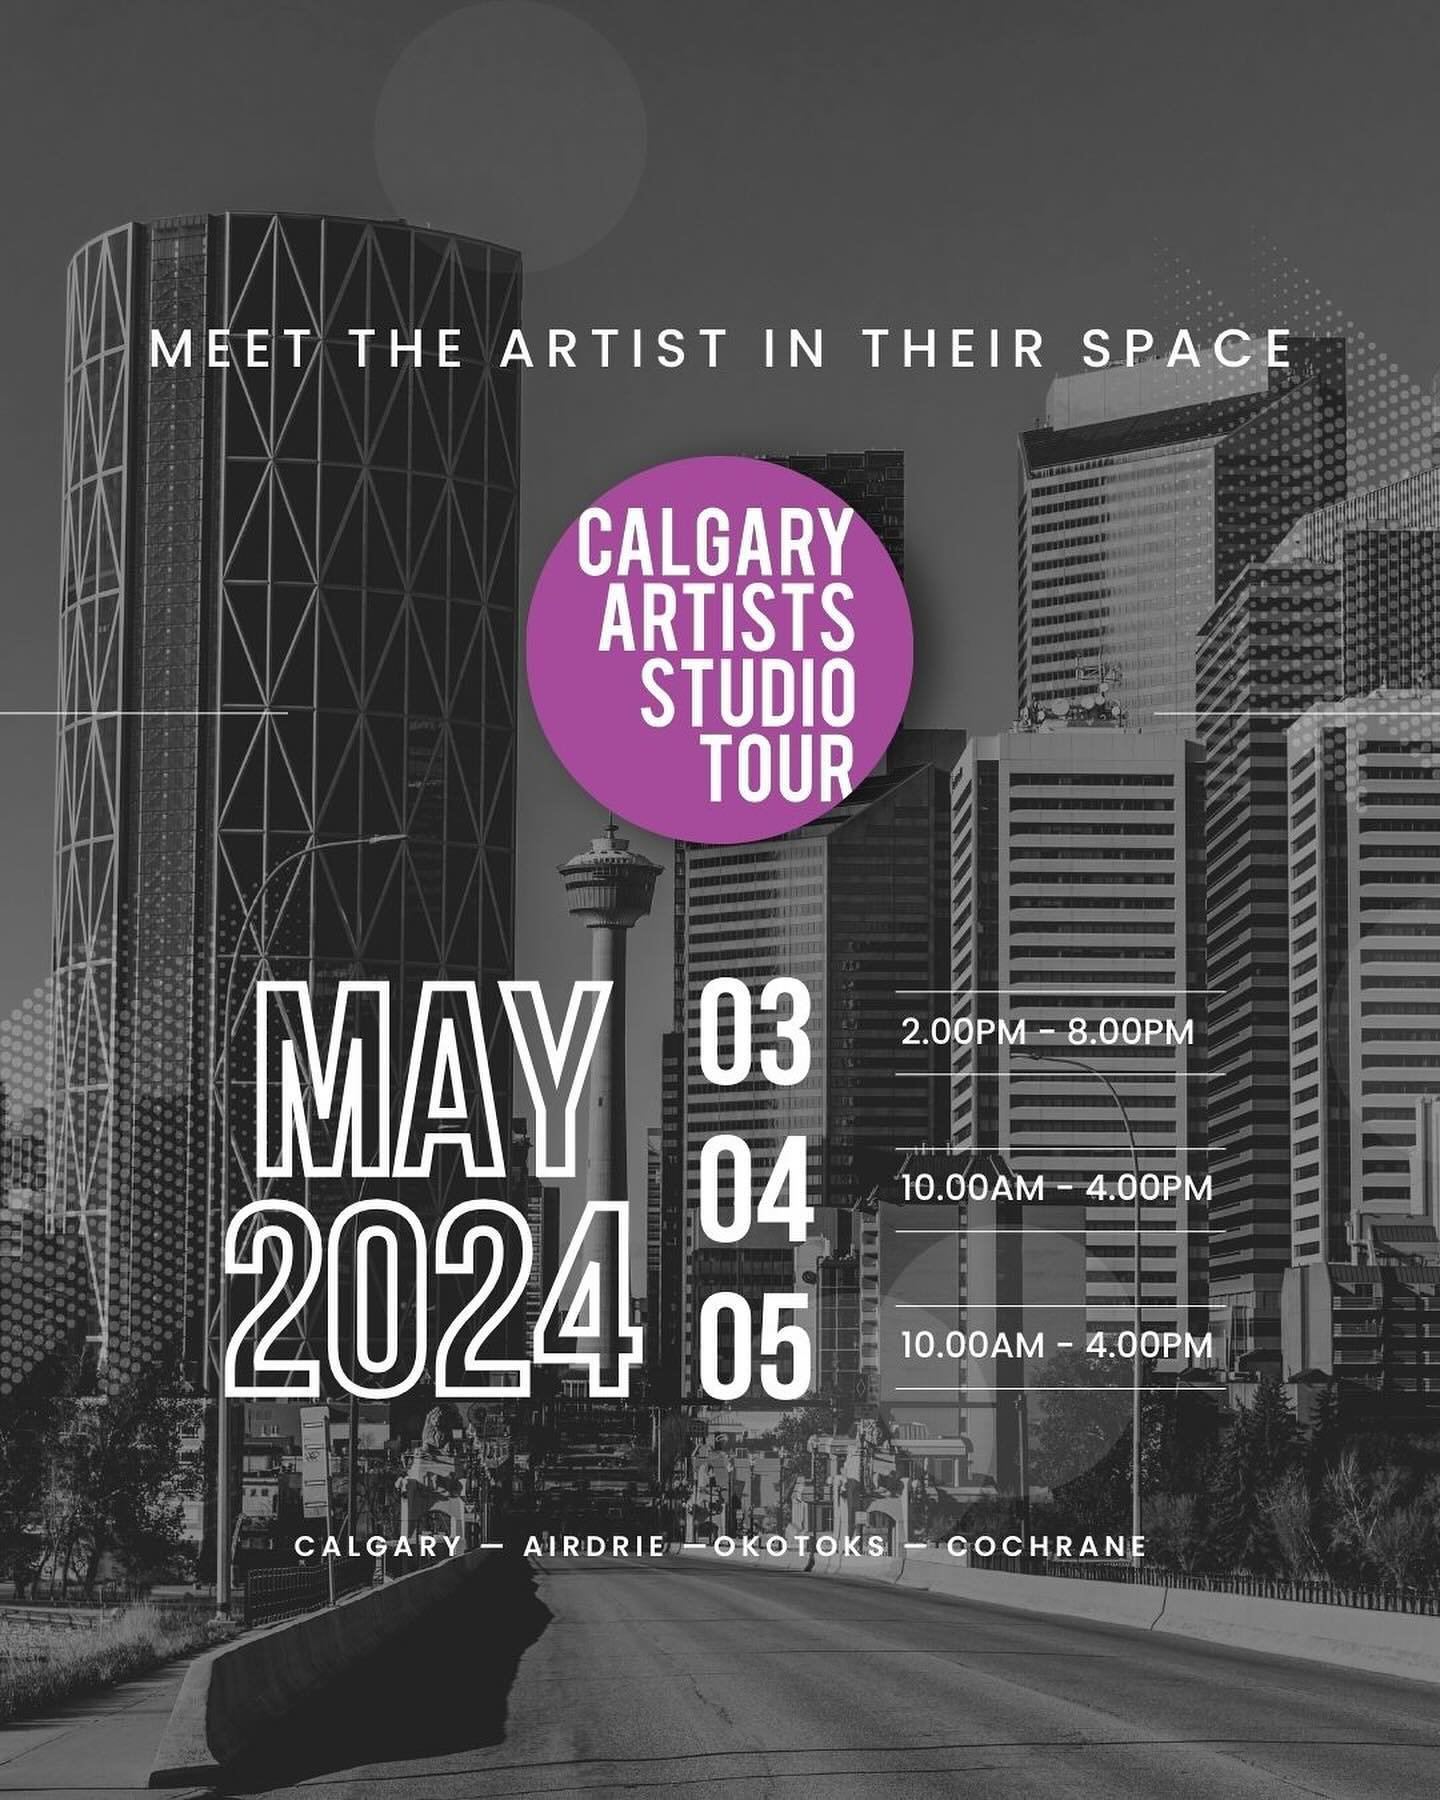 🚨Attention Art Lovers!🚨

The 3rd Annual Calgary Artists Studio Tour is almost here! Get ready for an amazing weekend packed with creativity &amp; connection!!🤩

💫Join us May 3rd-5th as over 80 local artists open up their studios &amp; workspaces 